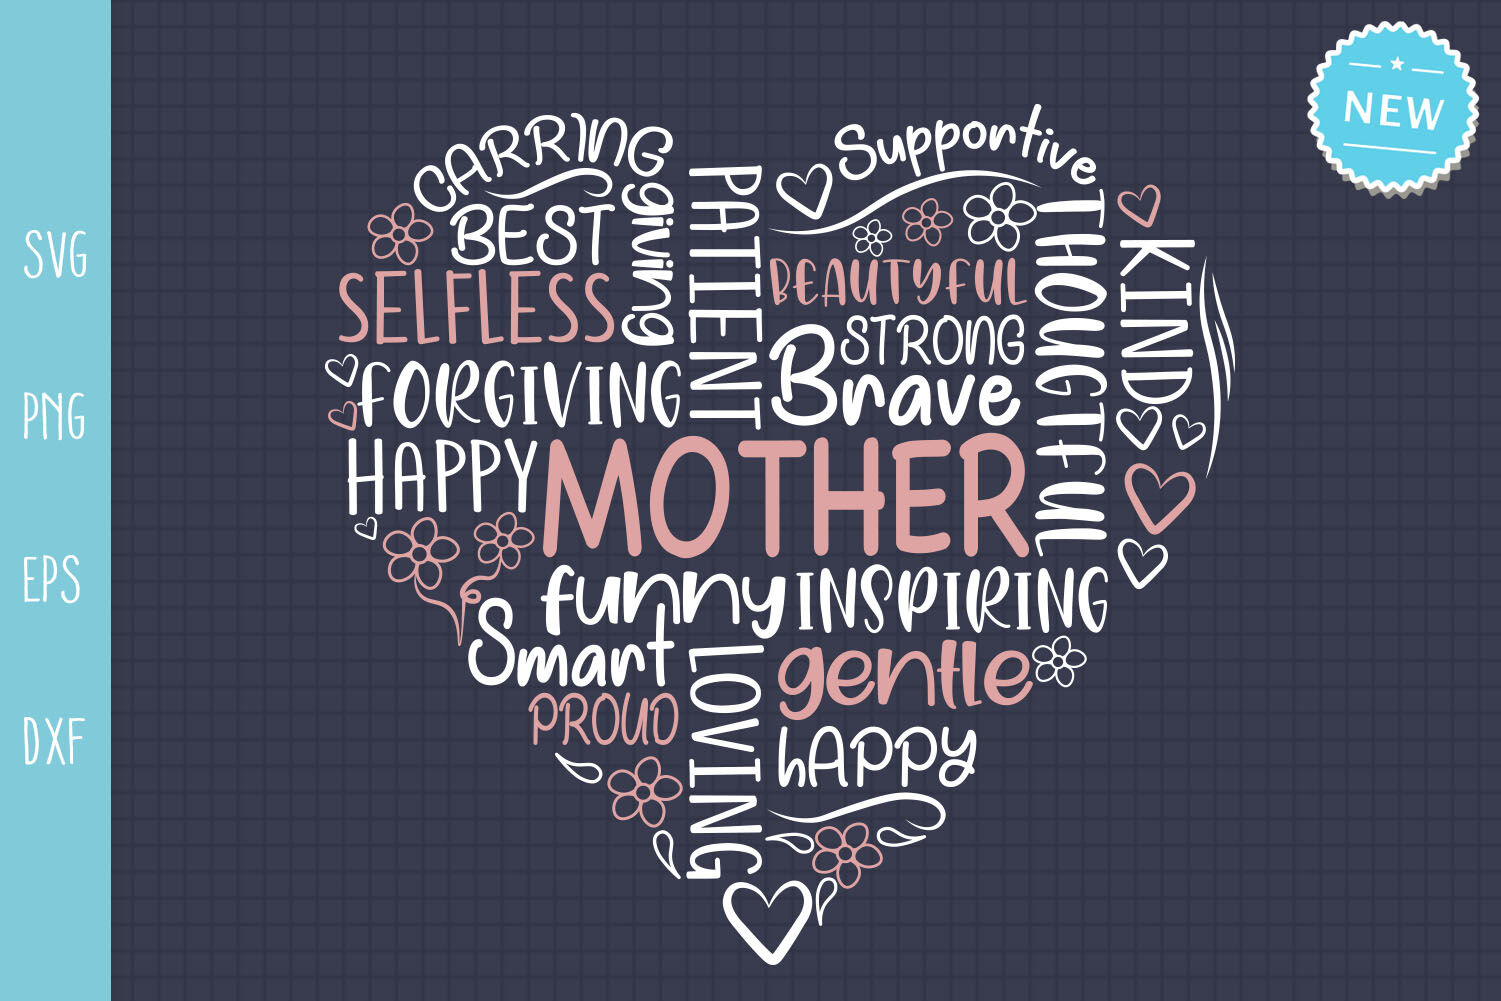 Mom Svg, Mom Quotes Svg, Mother's Day Svg By All About Svg